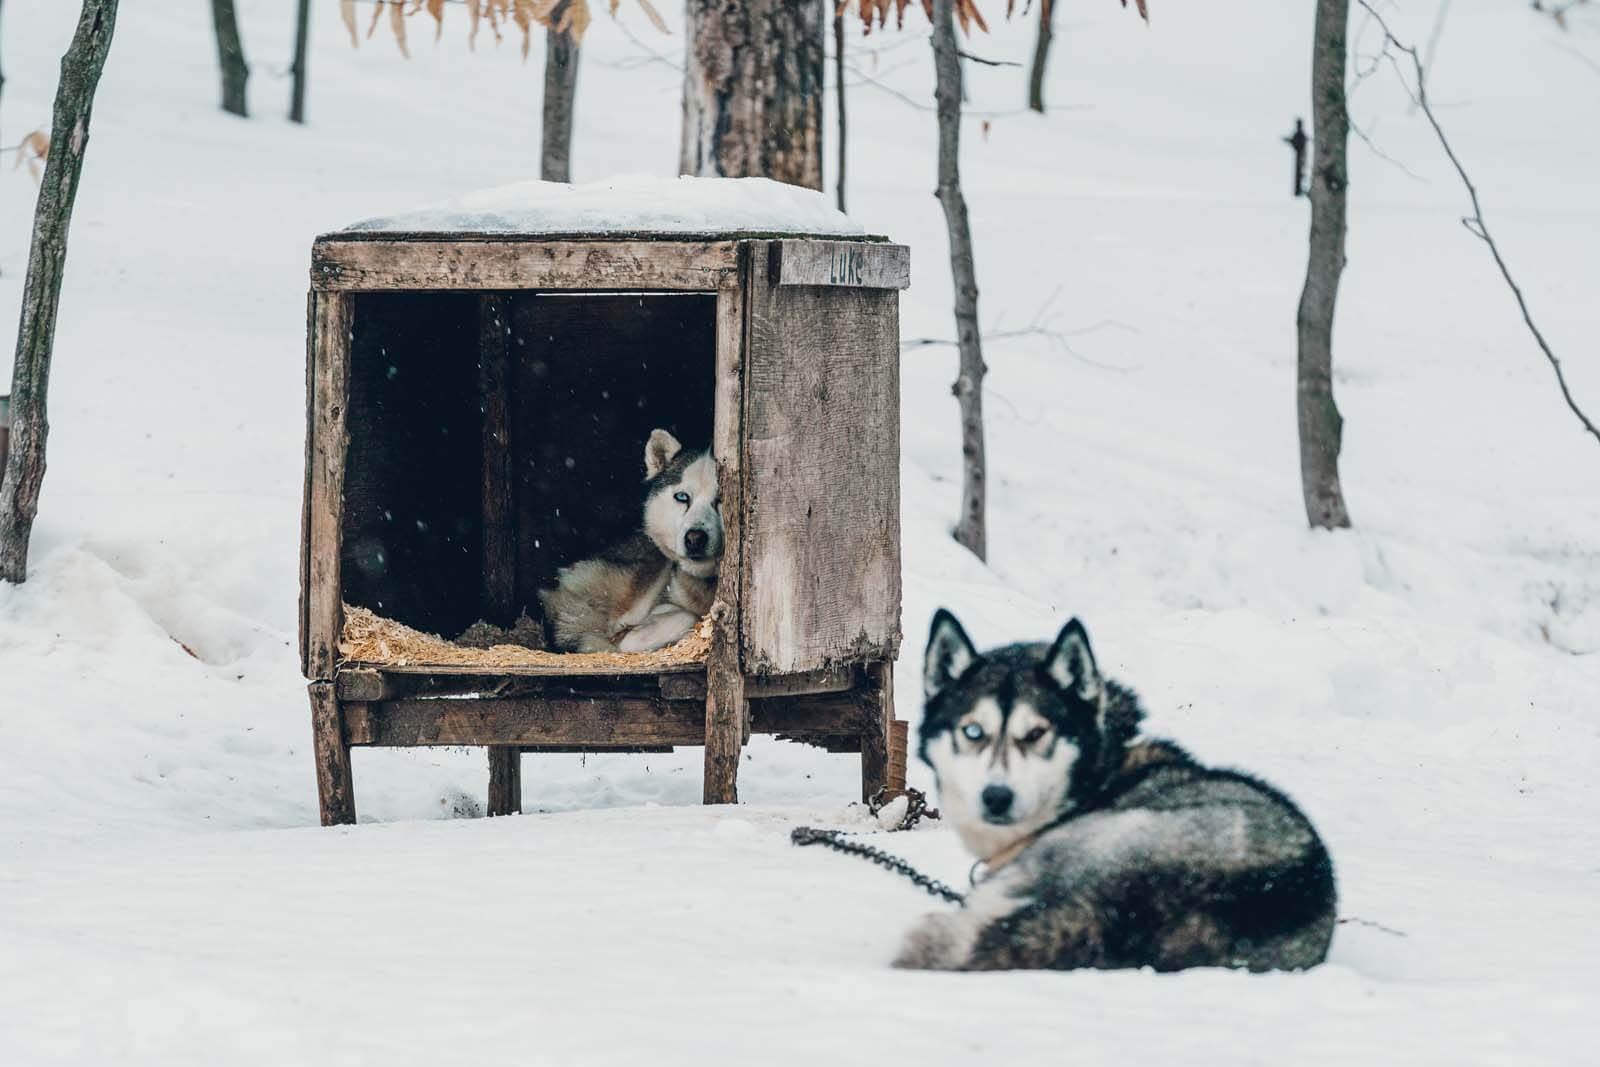 The dog sledding dogs at Aventures plein air in Quebec